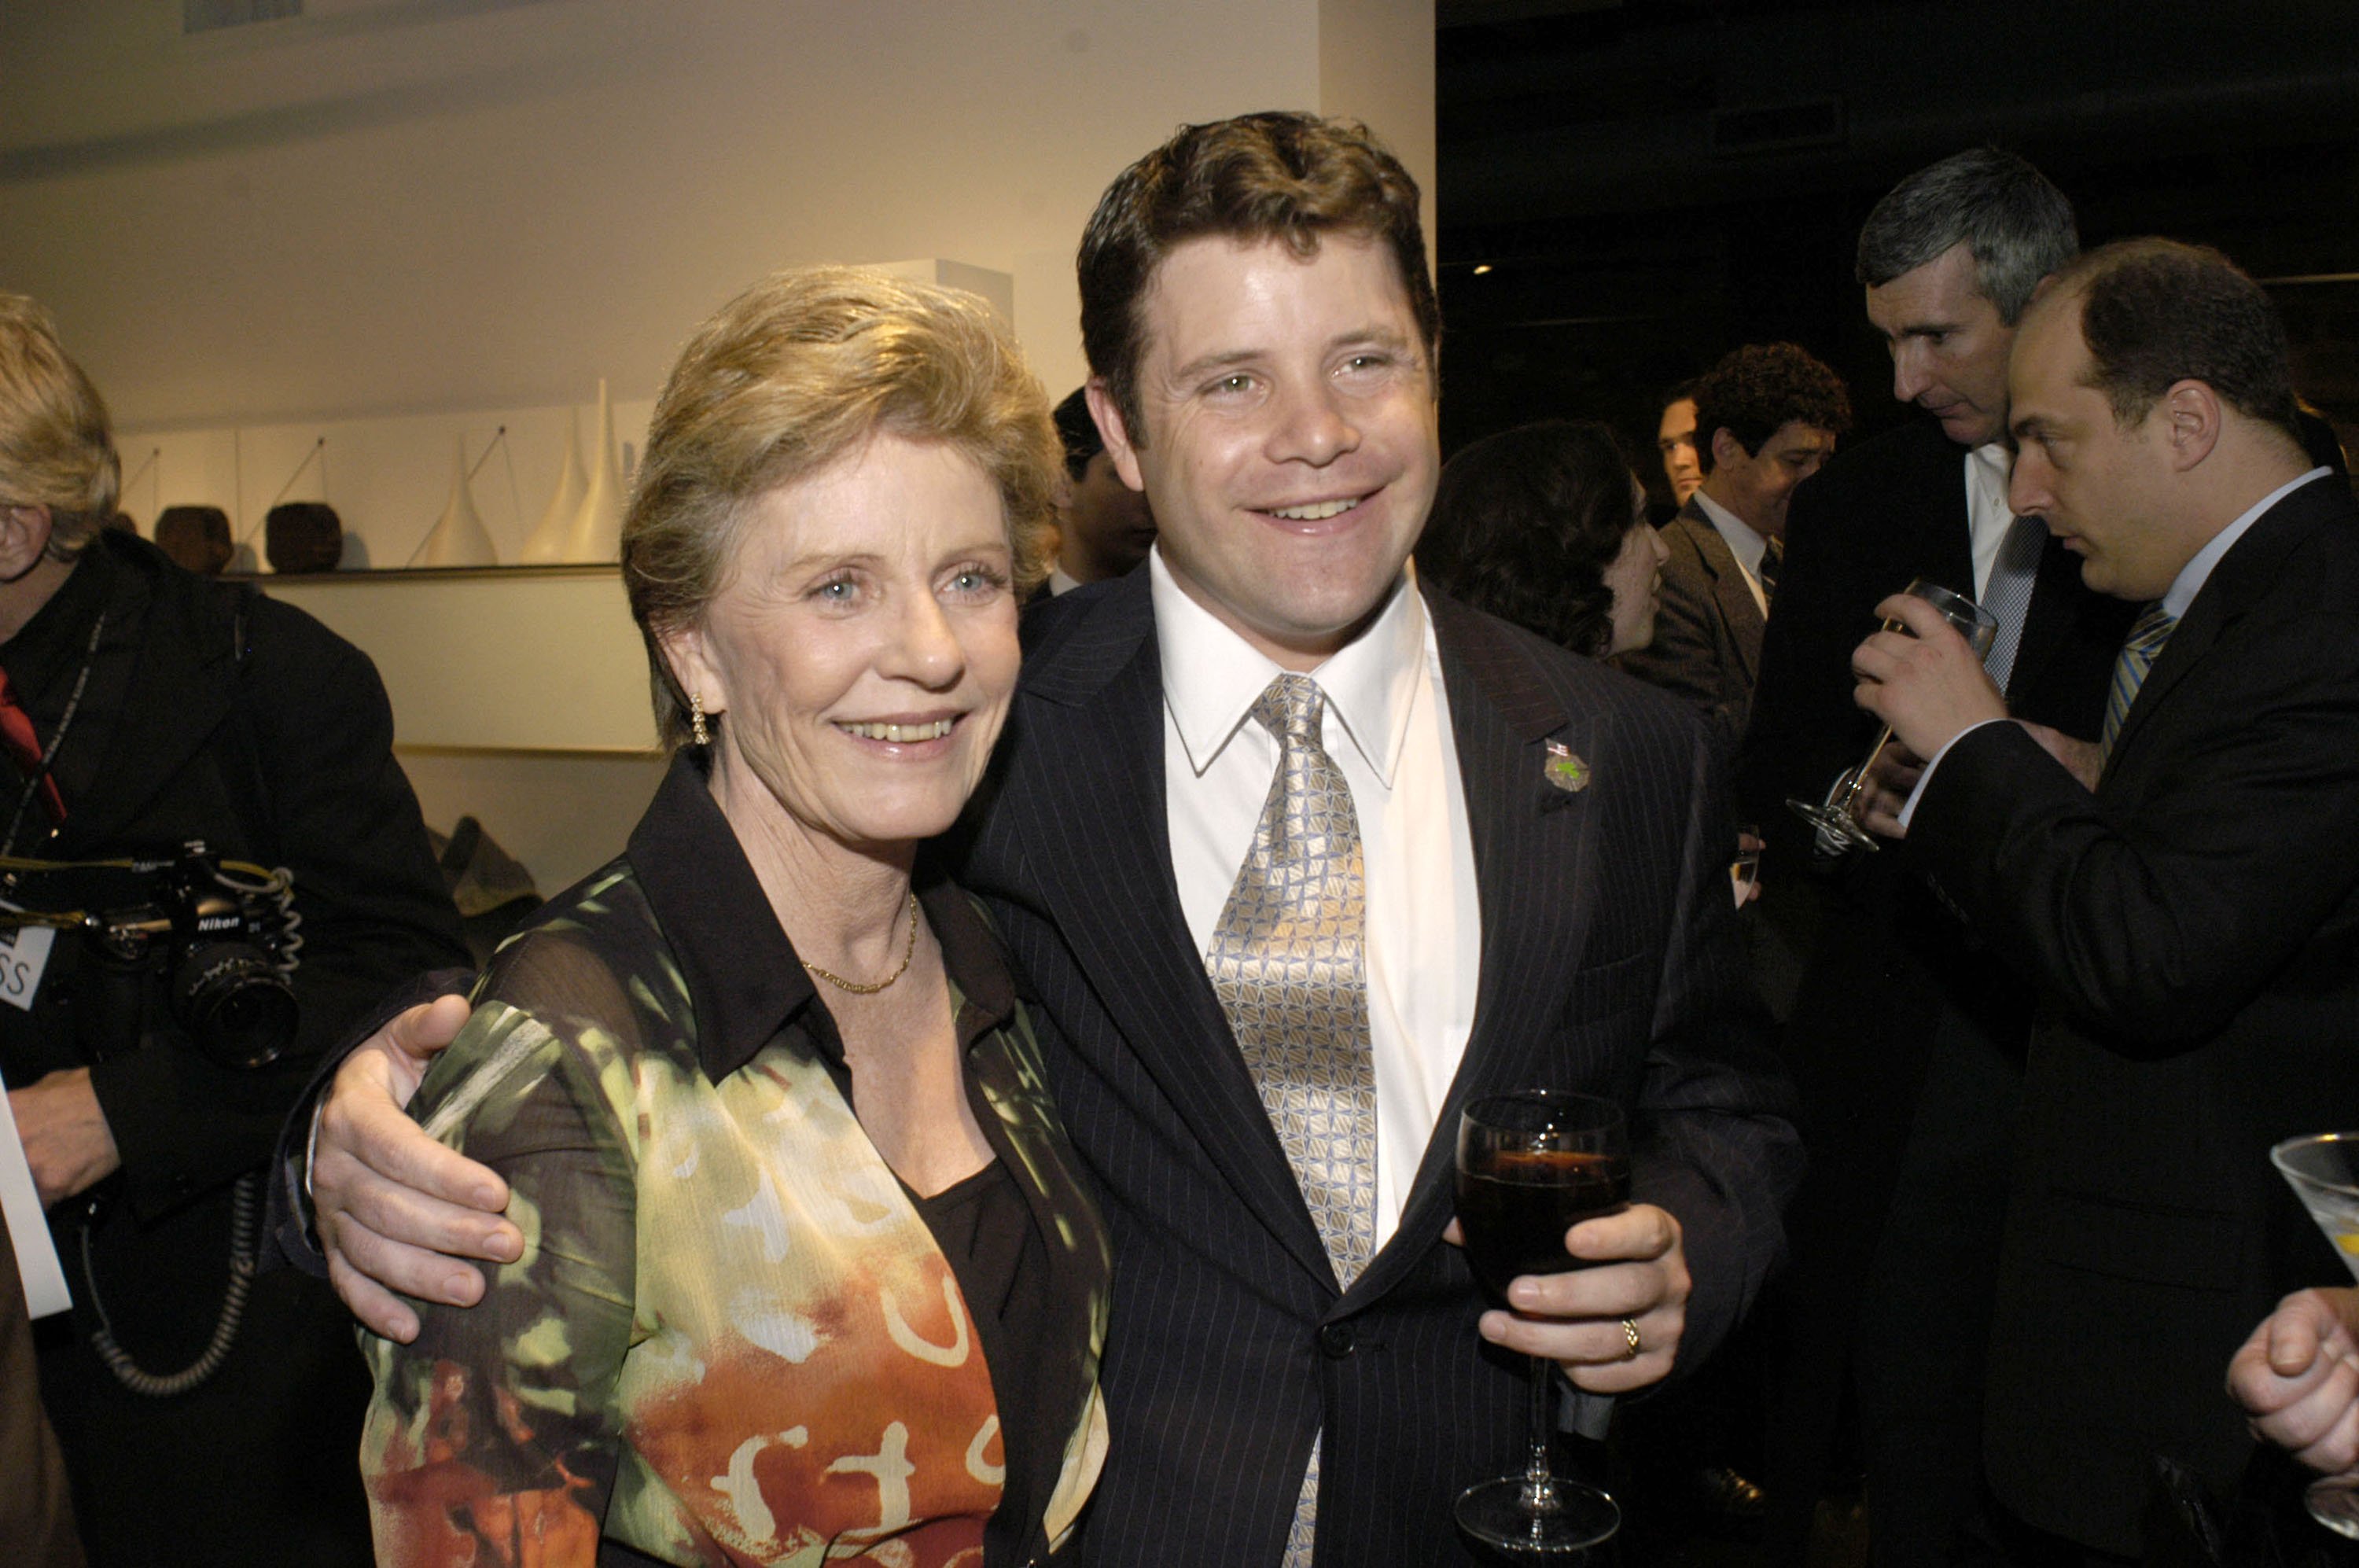 Patty Duke attends the Creative Coalition's 2004 Capitol Hill Spotlight Awards ceremony with her son actor Sean Astin March 30, 2004 in Washington, DC. Photo: Getty Images